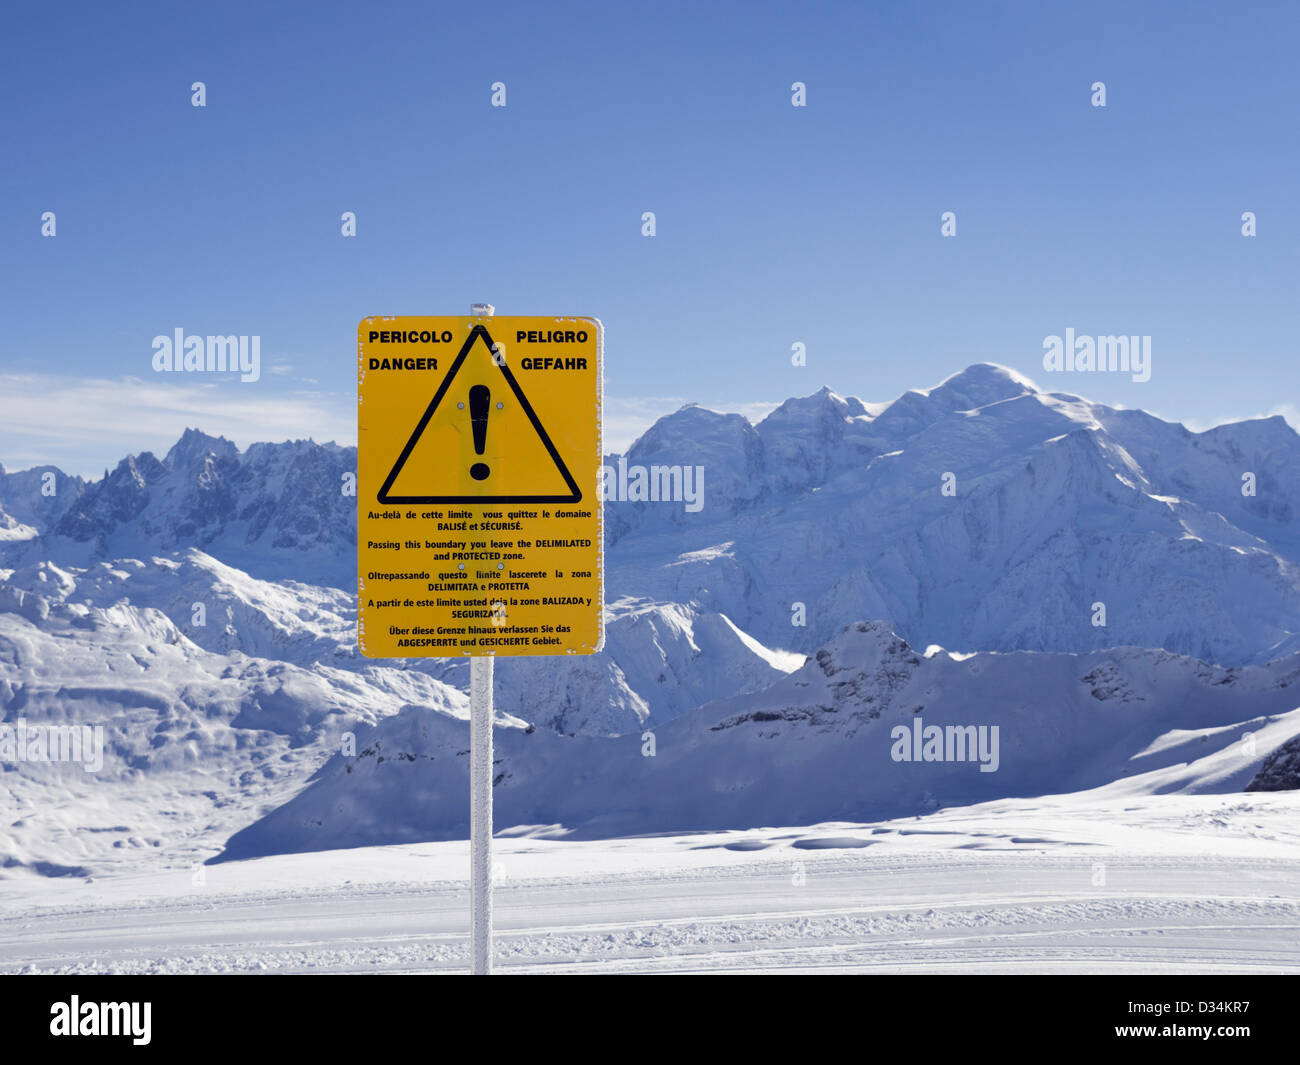 Off-piste warning sign and view from Les Grandes Platieres in Grand Massif ski area to Mont Blanc and mountains in French Alps. Stock Photo